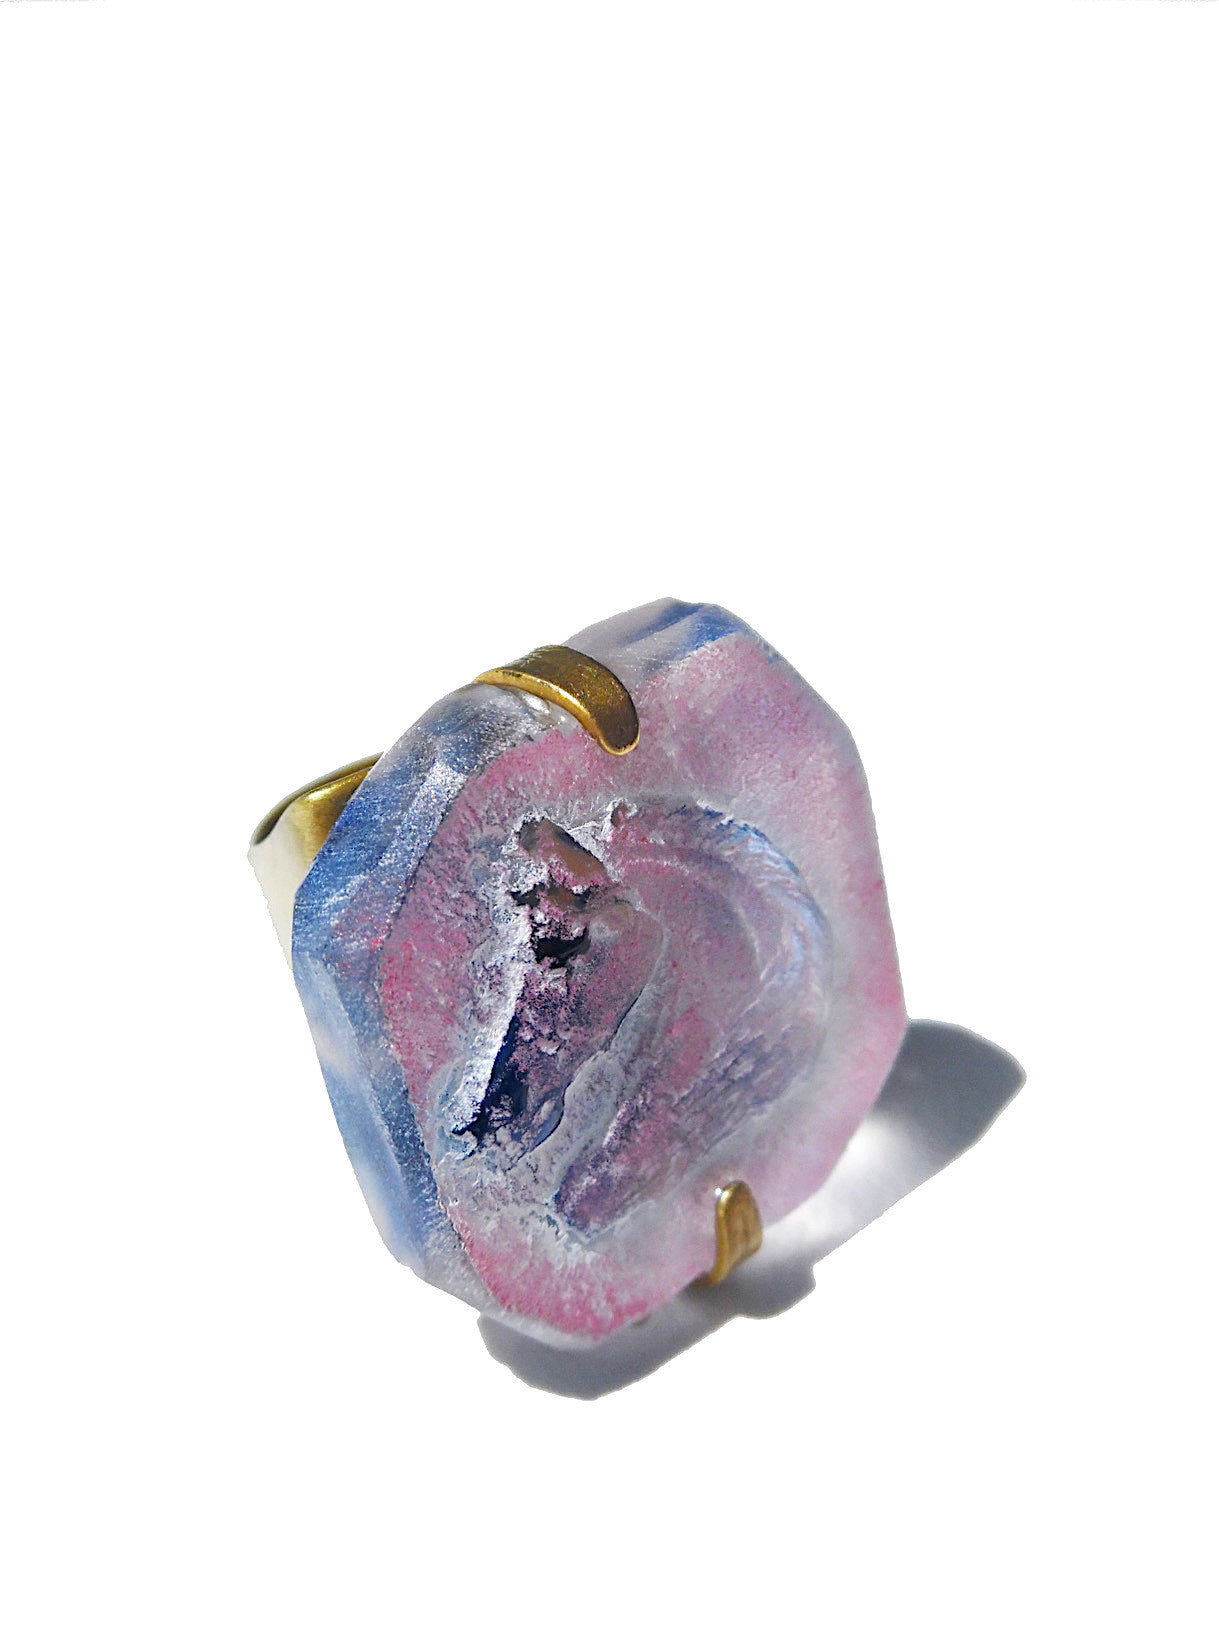 Ring Hand Cast French Glass Pink Blue Horse